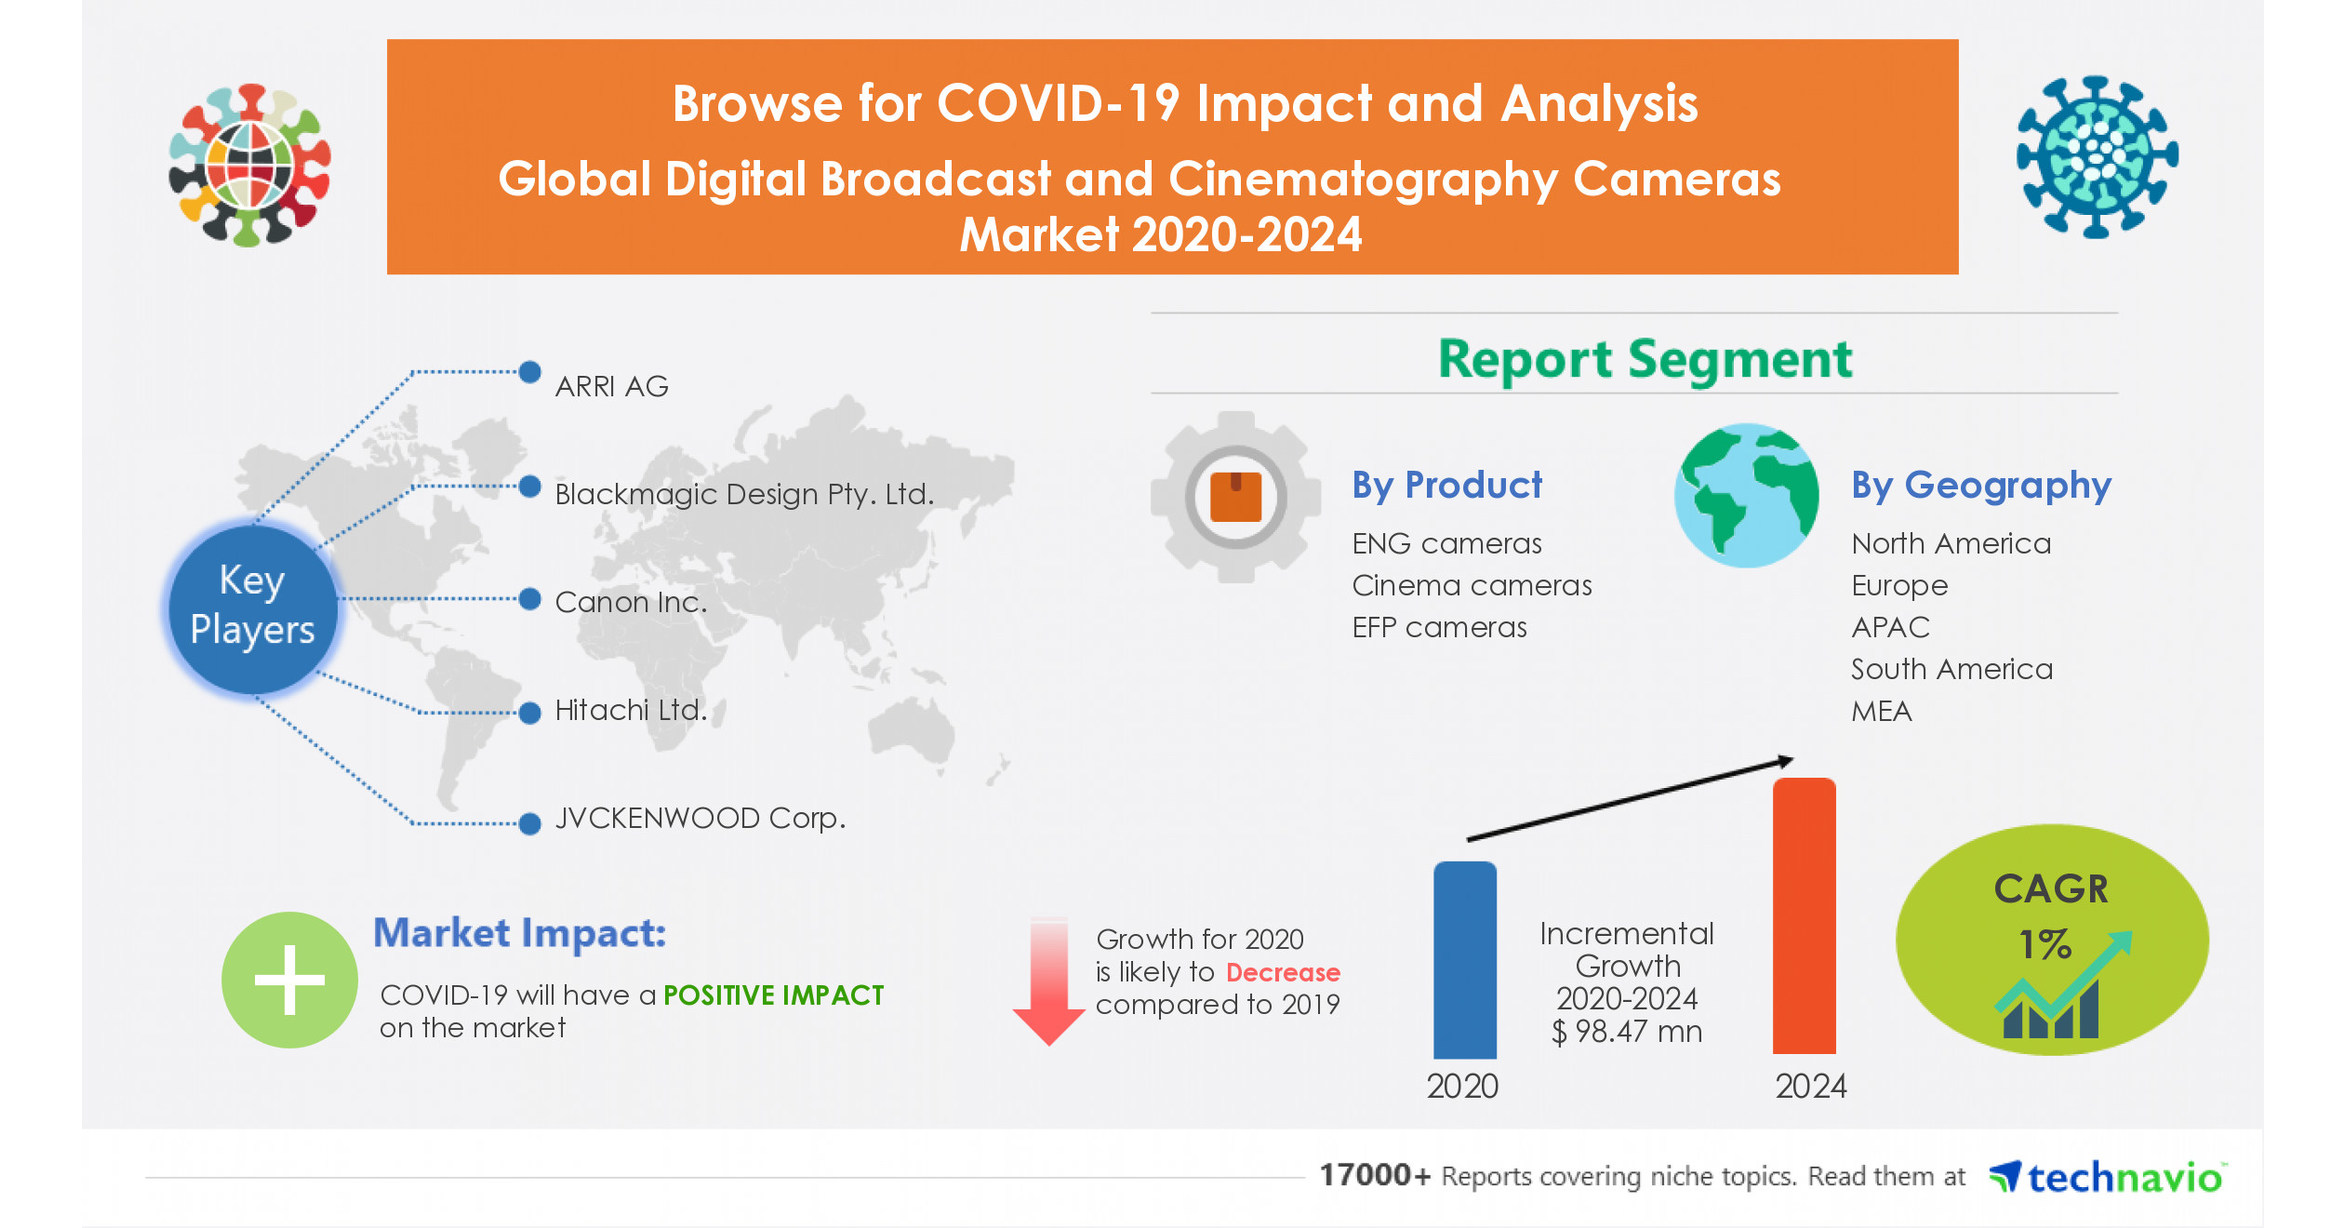 Digital Broadcast and Cinematography Cameras Market to Accelerate at a